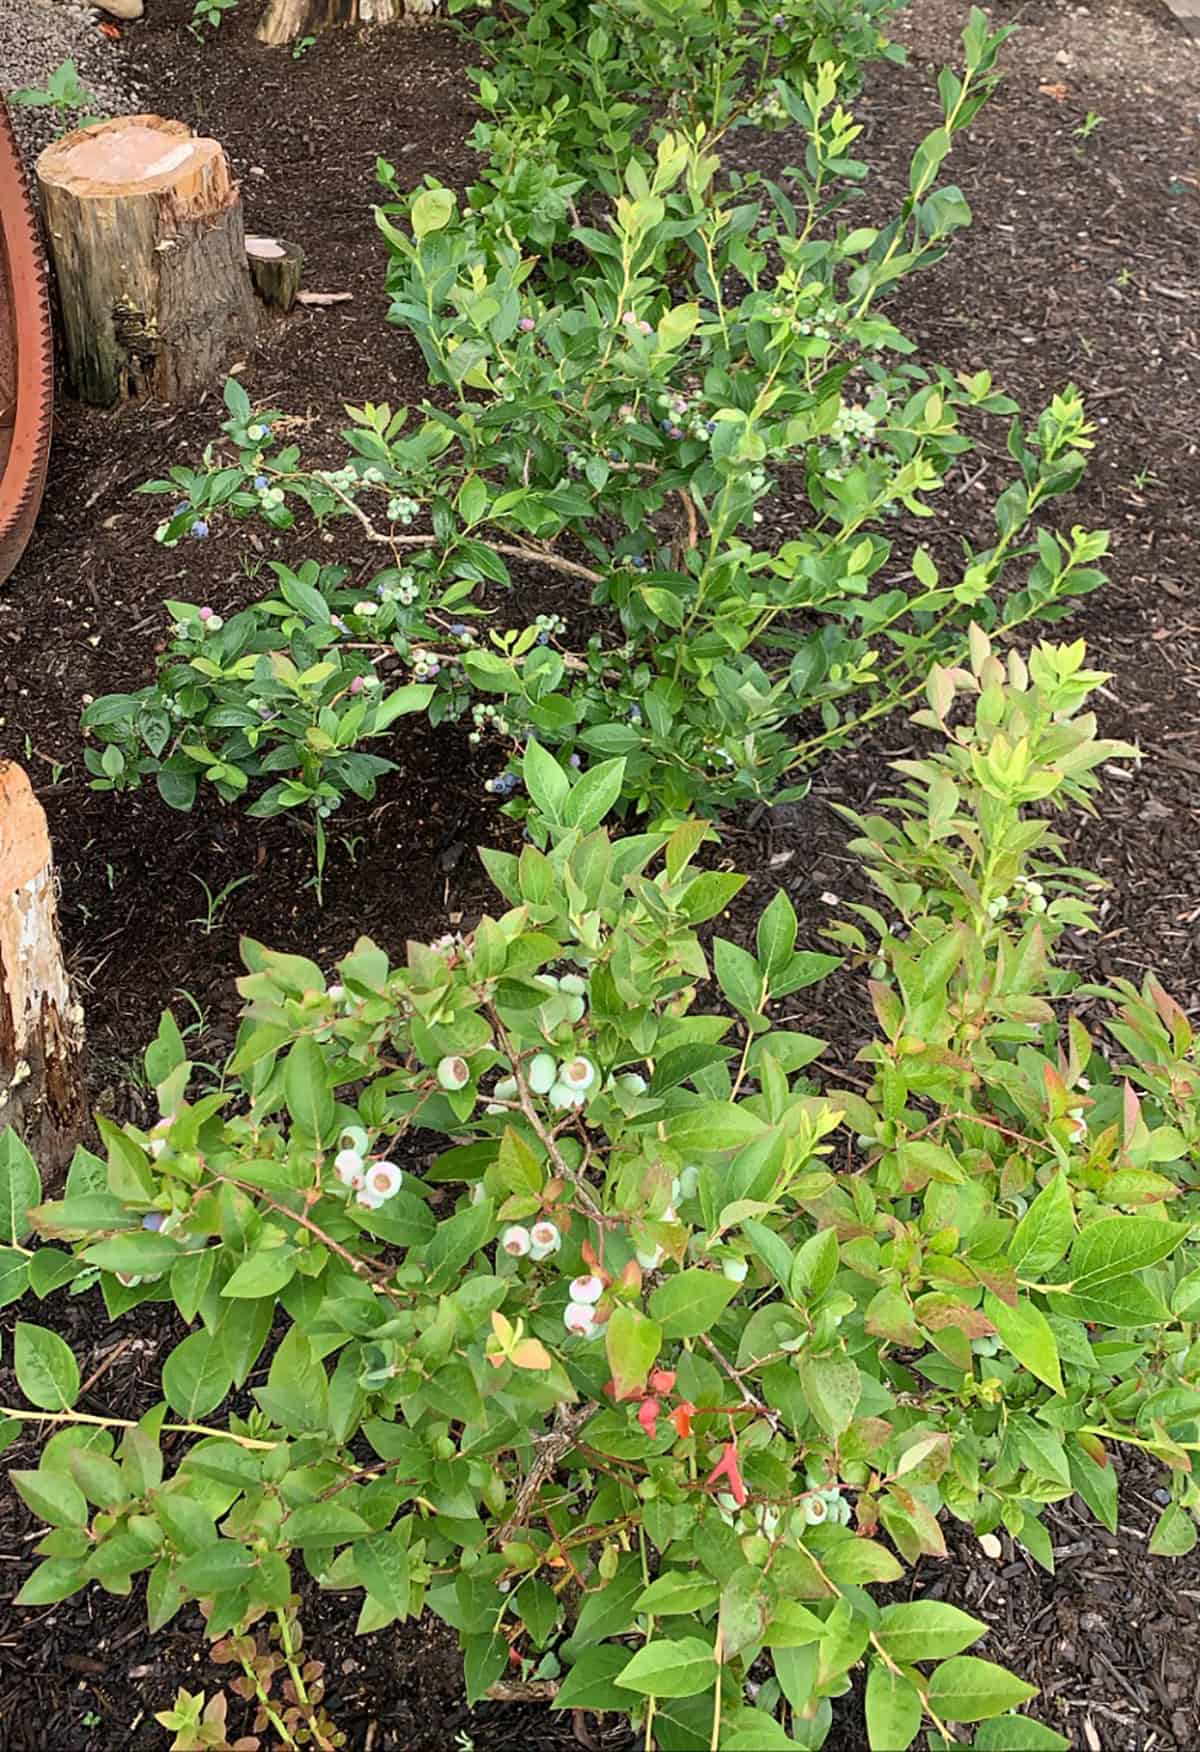 Blueberry plants with berries.